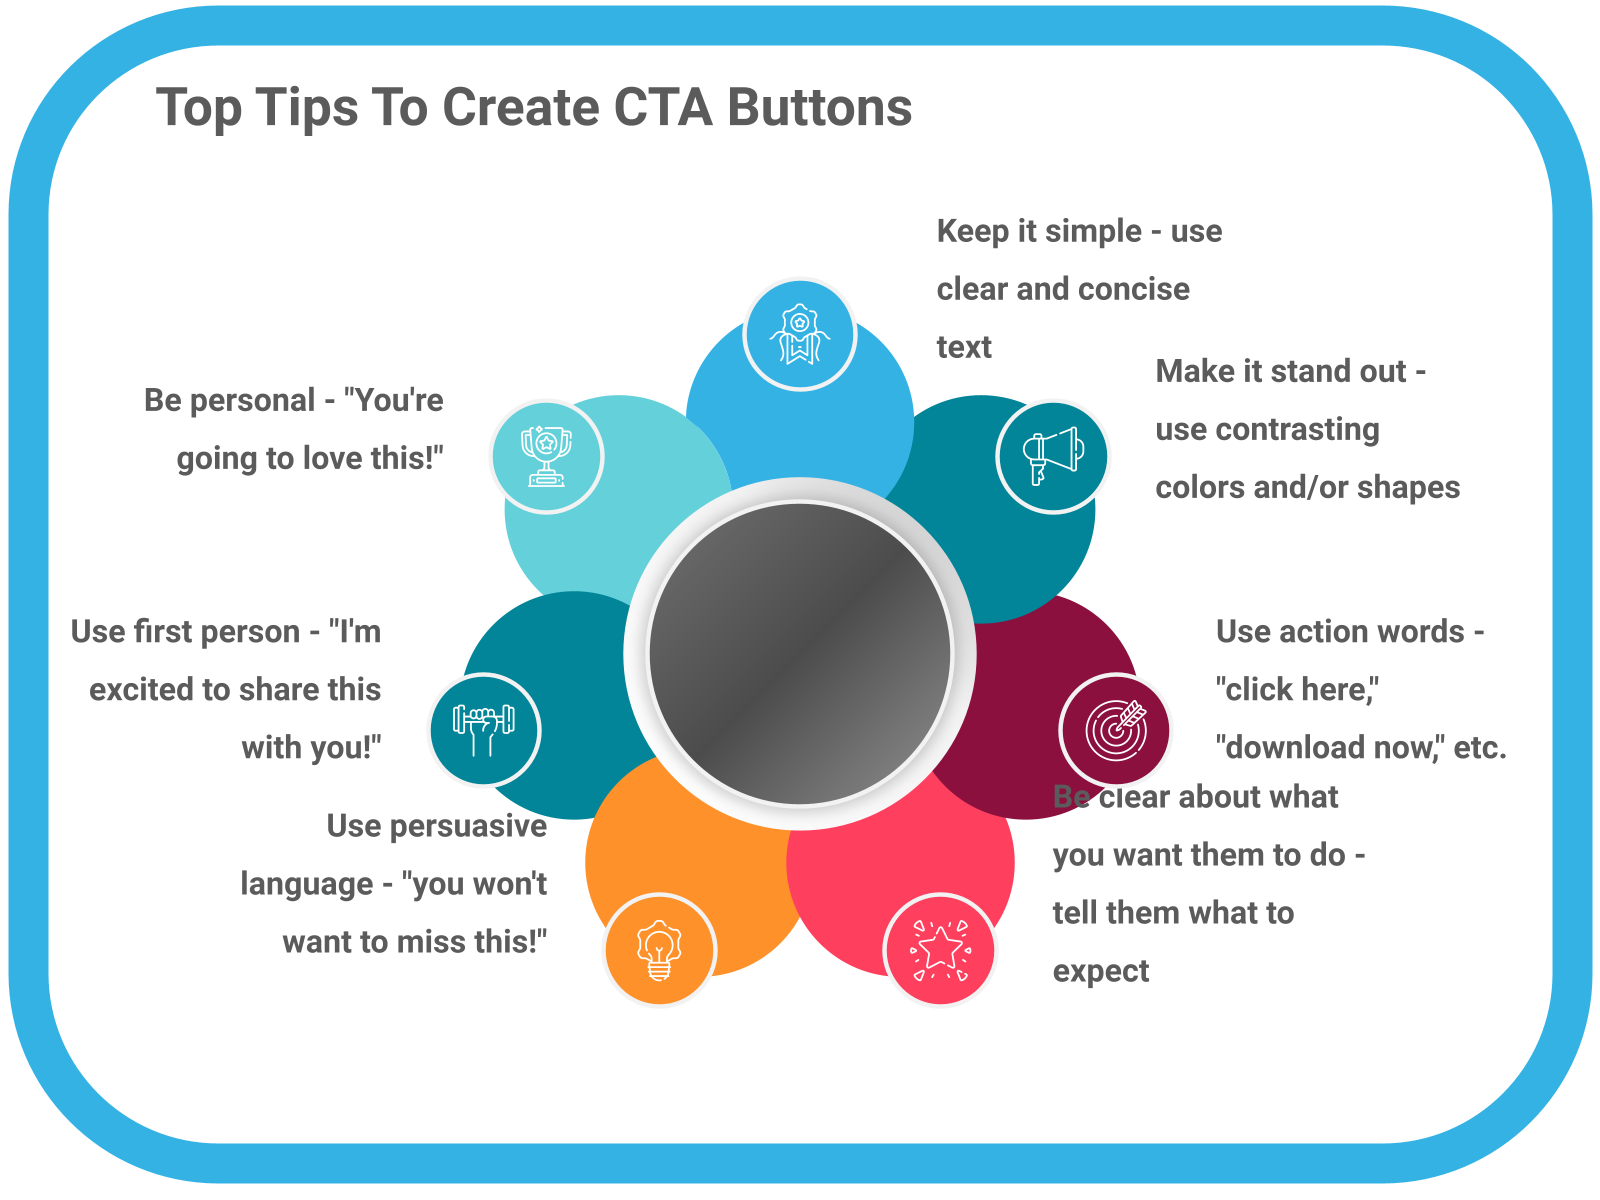 Top 10 Tips To Create CTA Buttons